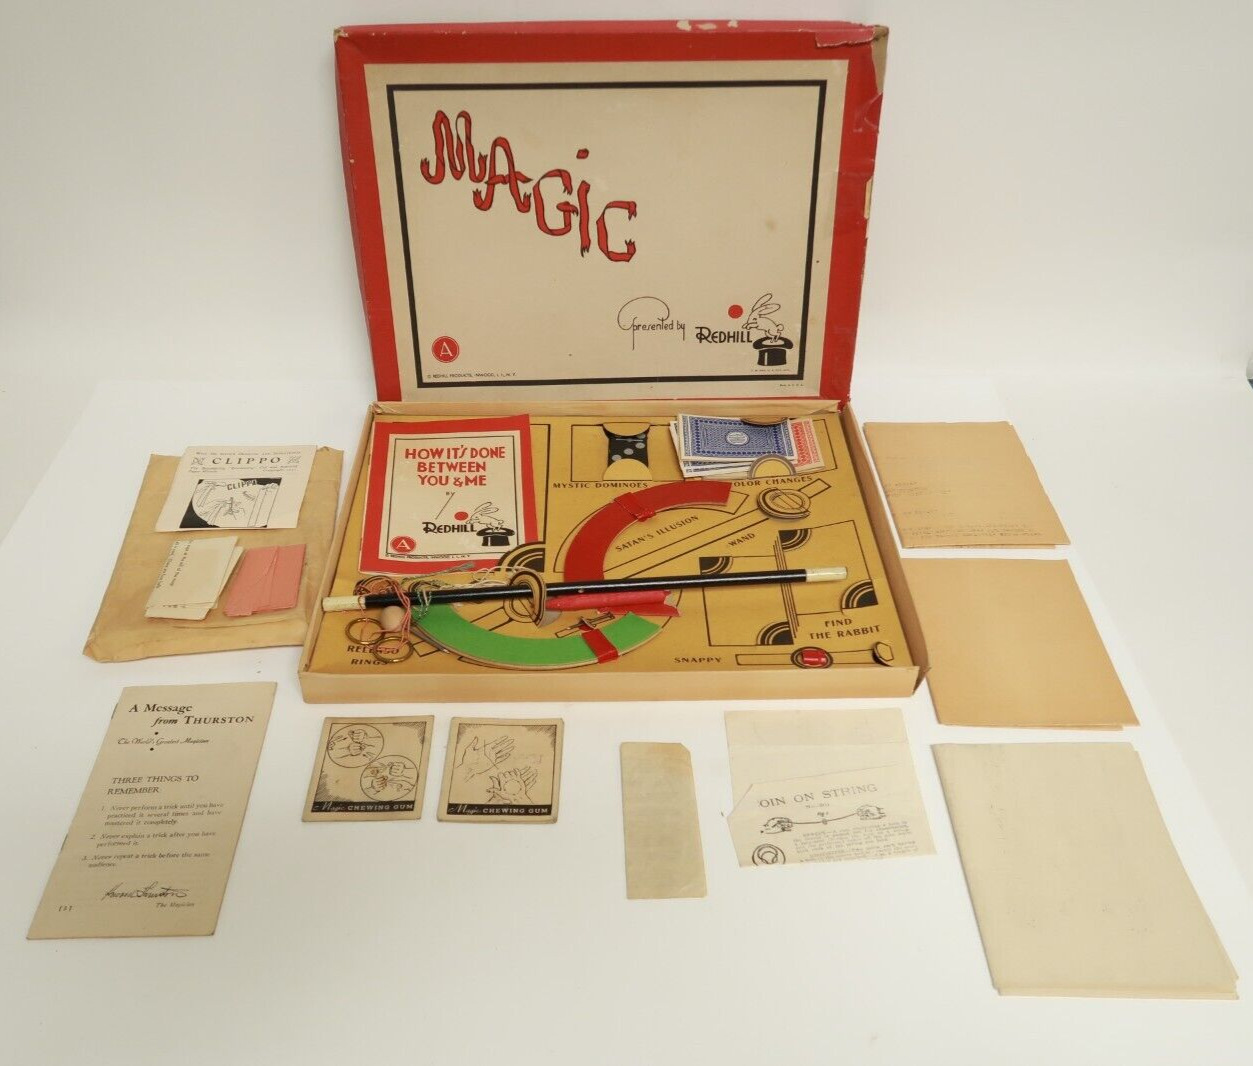 VTG MAGIC presented by Redhill Box Set Magician Kit Redhill Products AC Gilbert